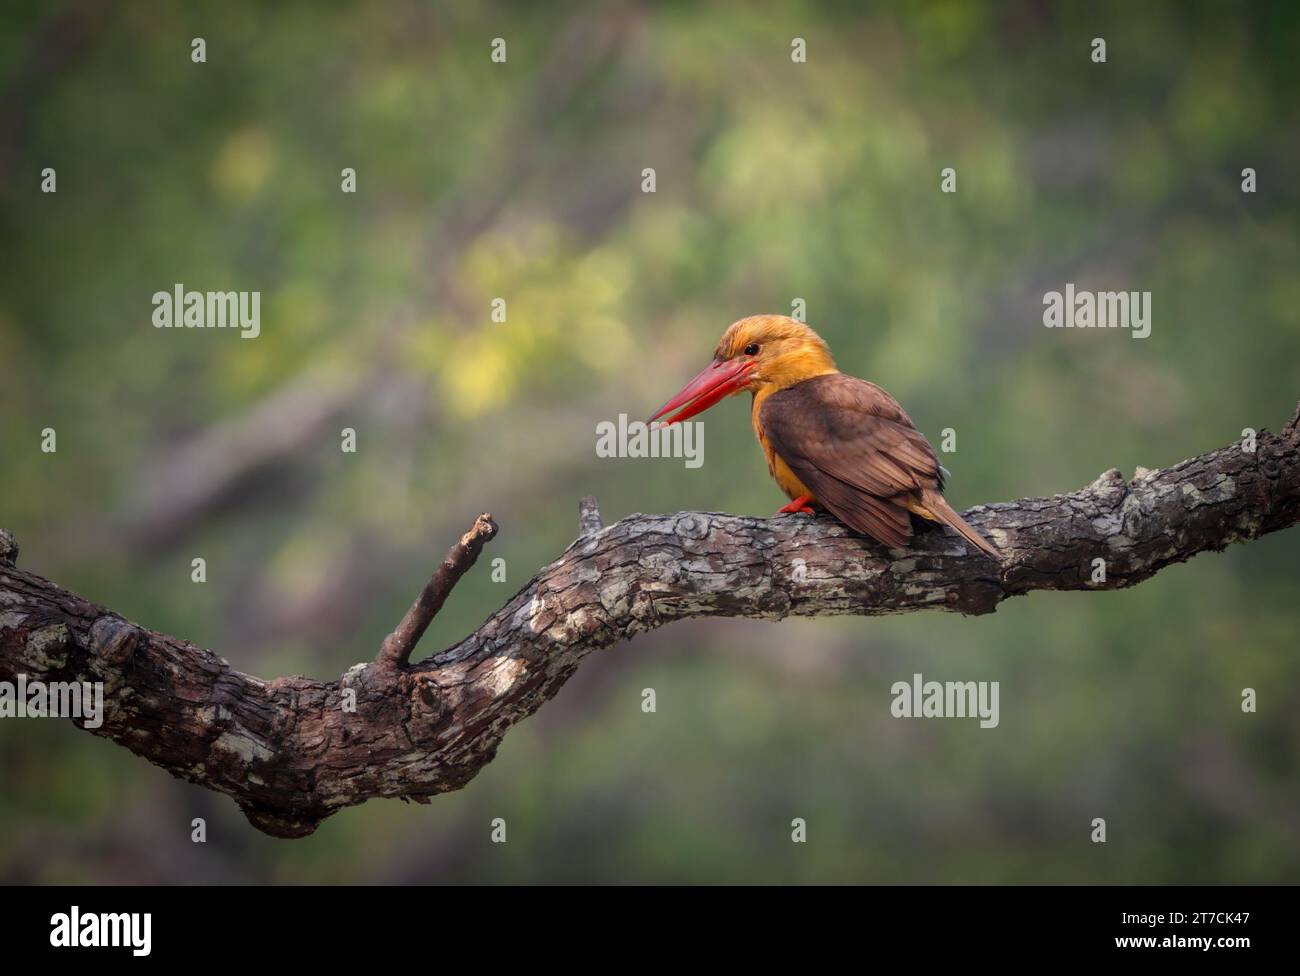 Brown-winged kingfisher is a species of bird in the subfamily Halcyoninae. Stock Photo